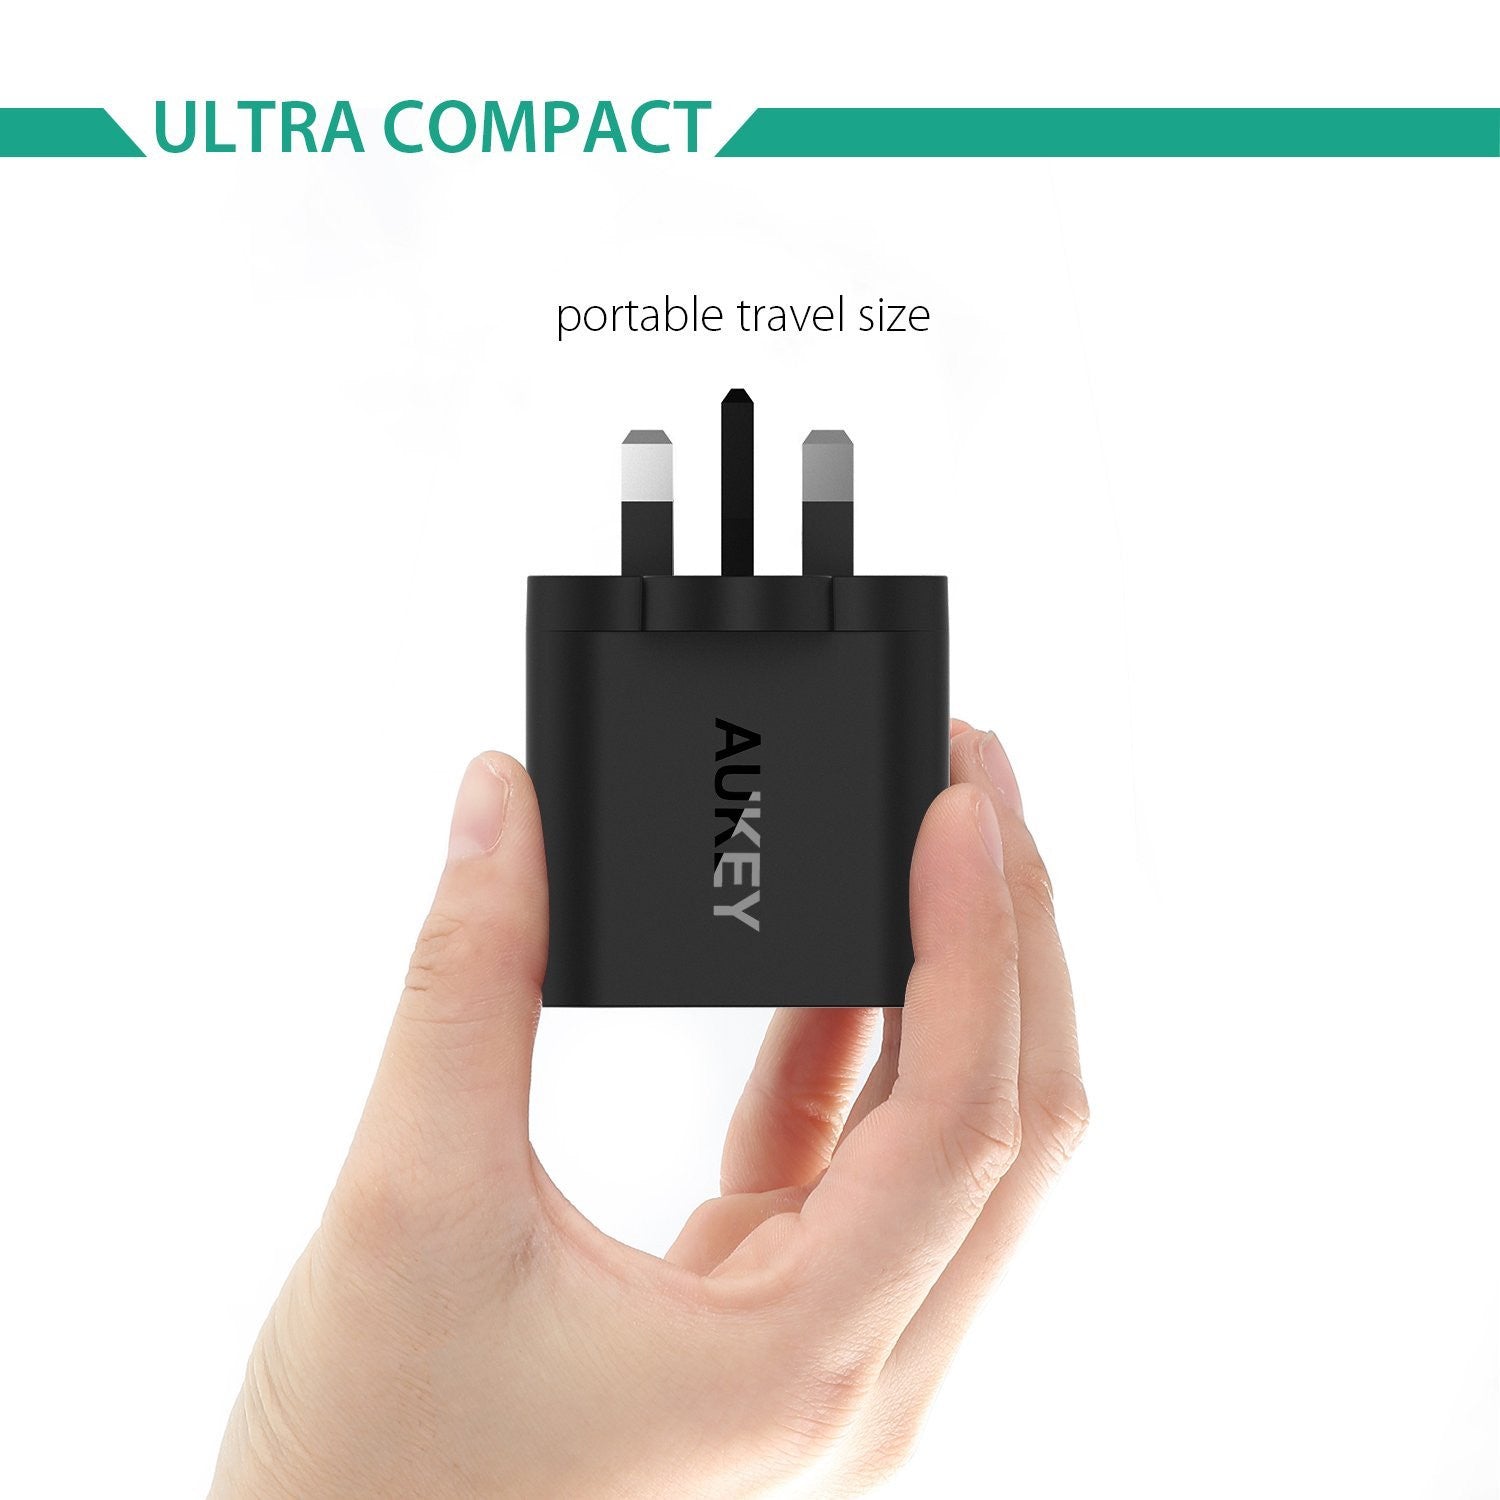 AUKEY PA-U28 Qualcomm Quick Charge 2.0 Wall Charger (UK PLUG) - Aukey Malaysia Official Store